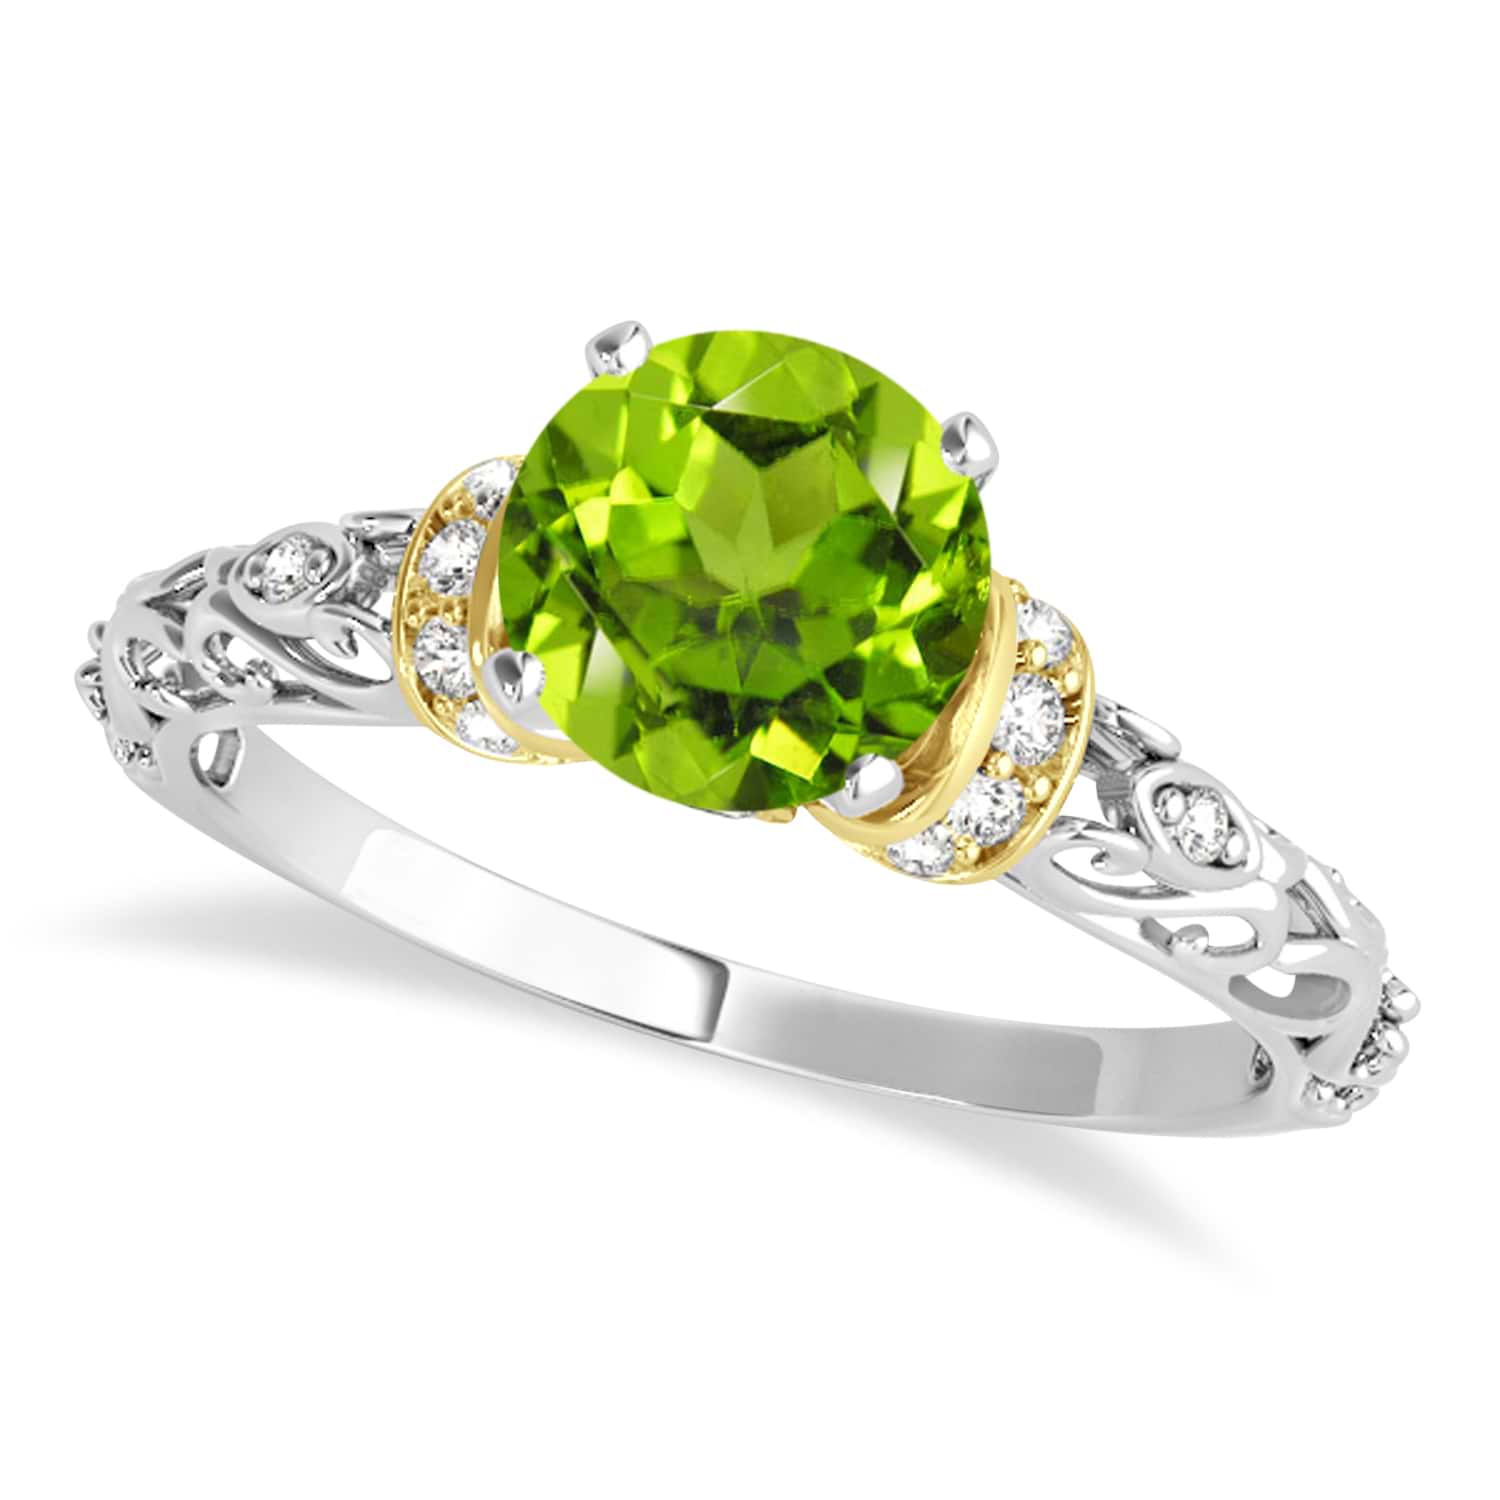 Peridot & Diamond Antique Style Engagement Ring 18k Two-Tone Gold (1.62ct)